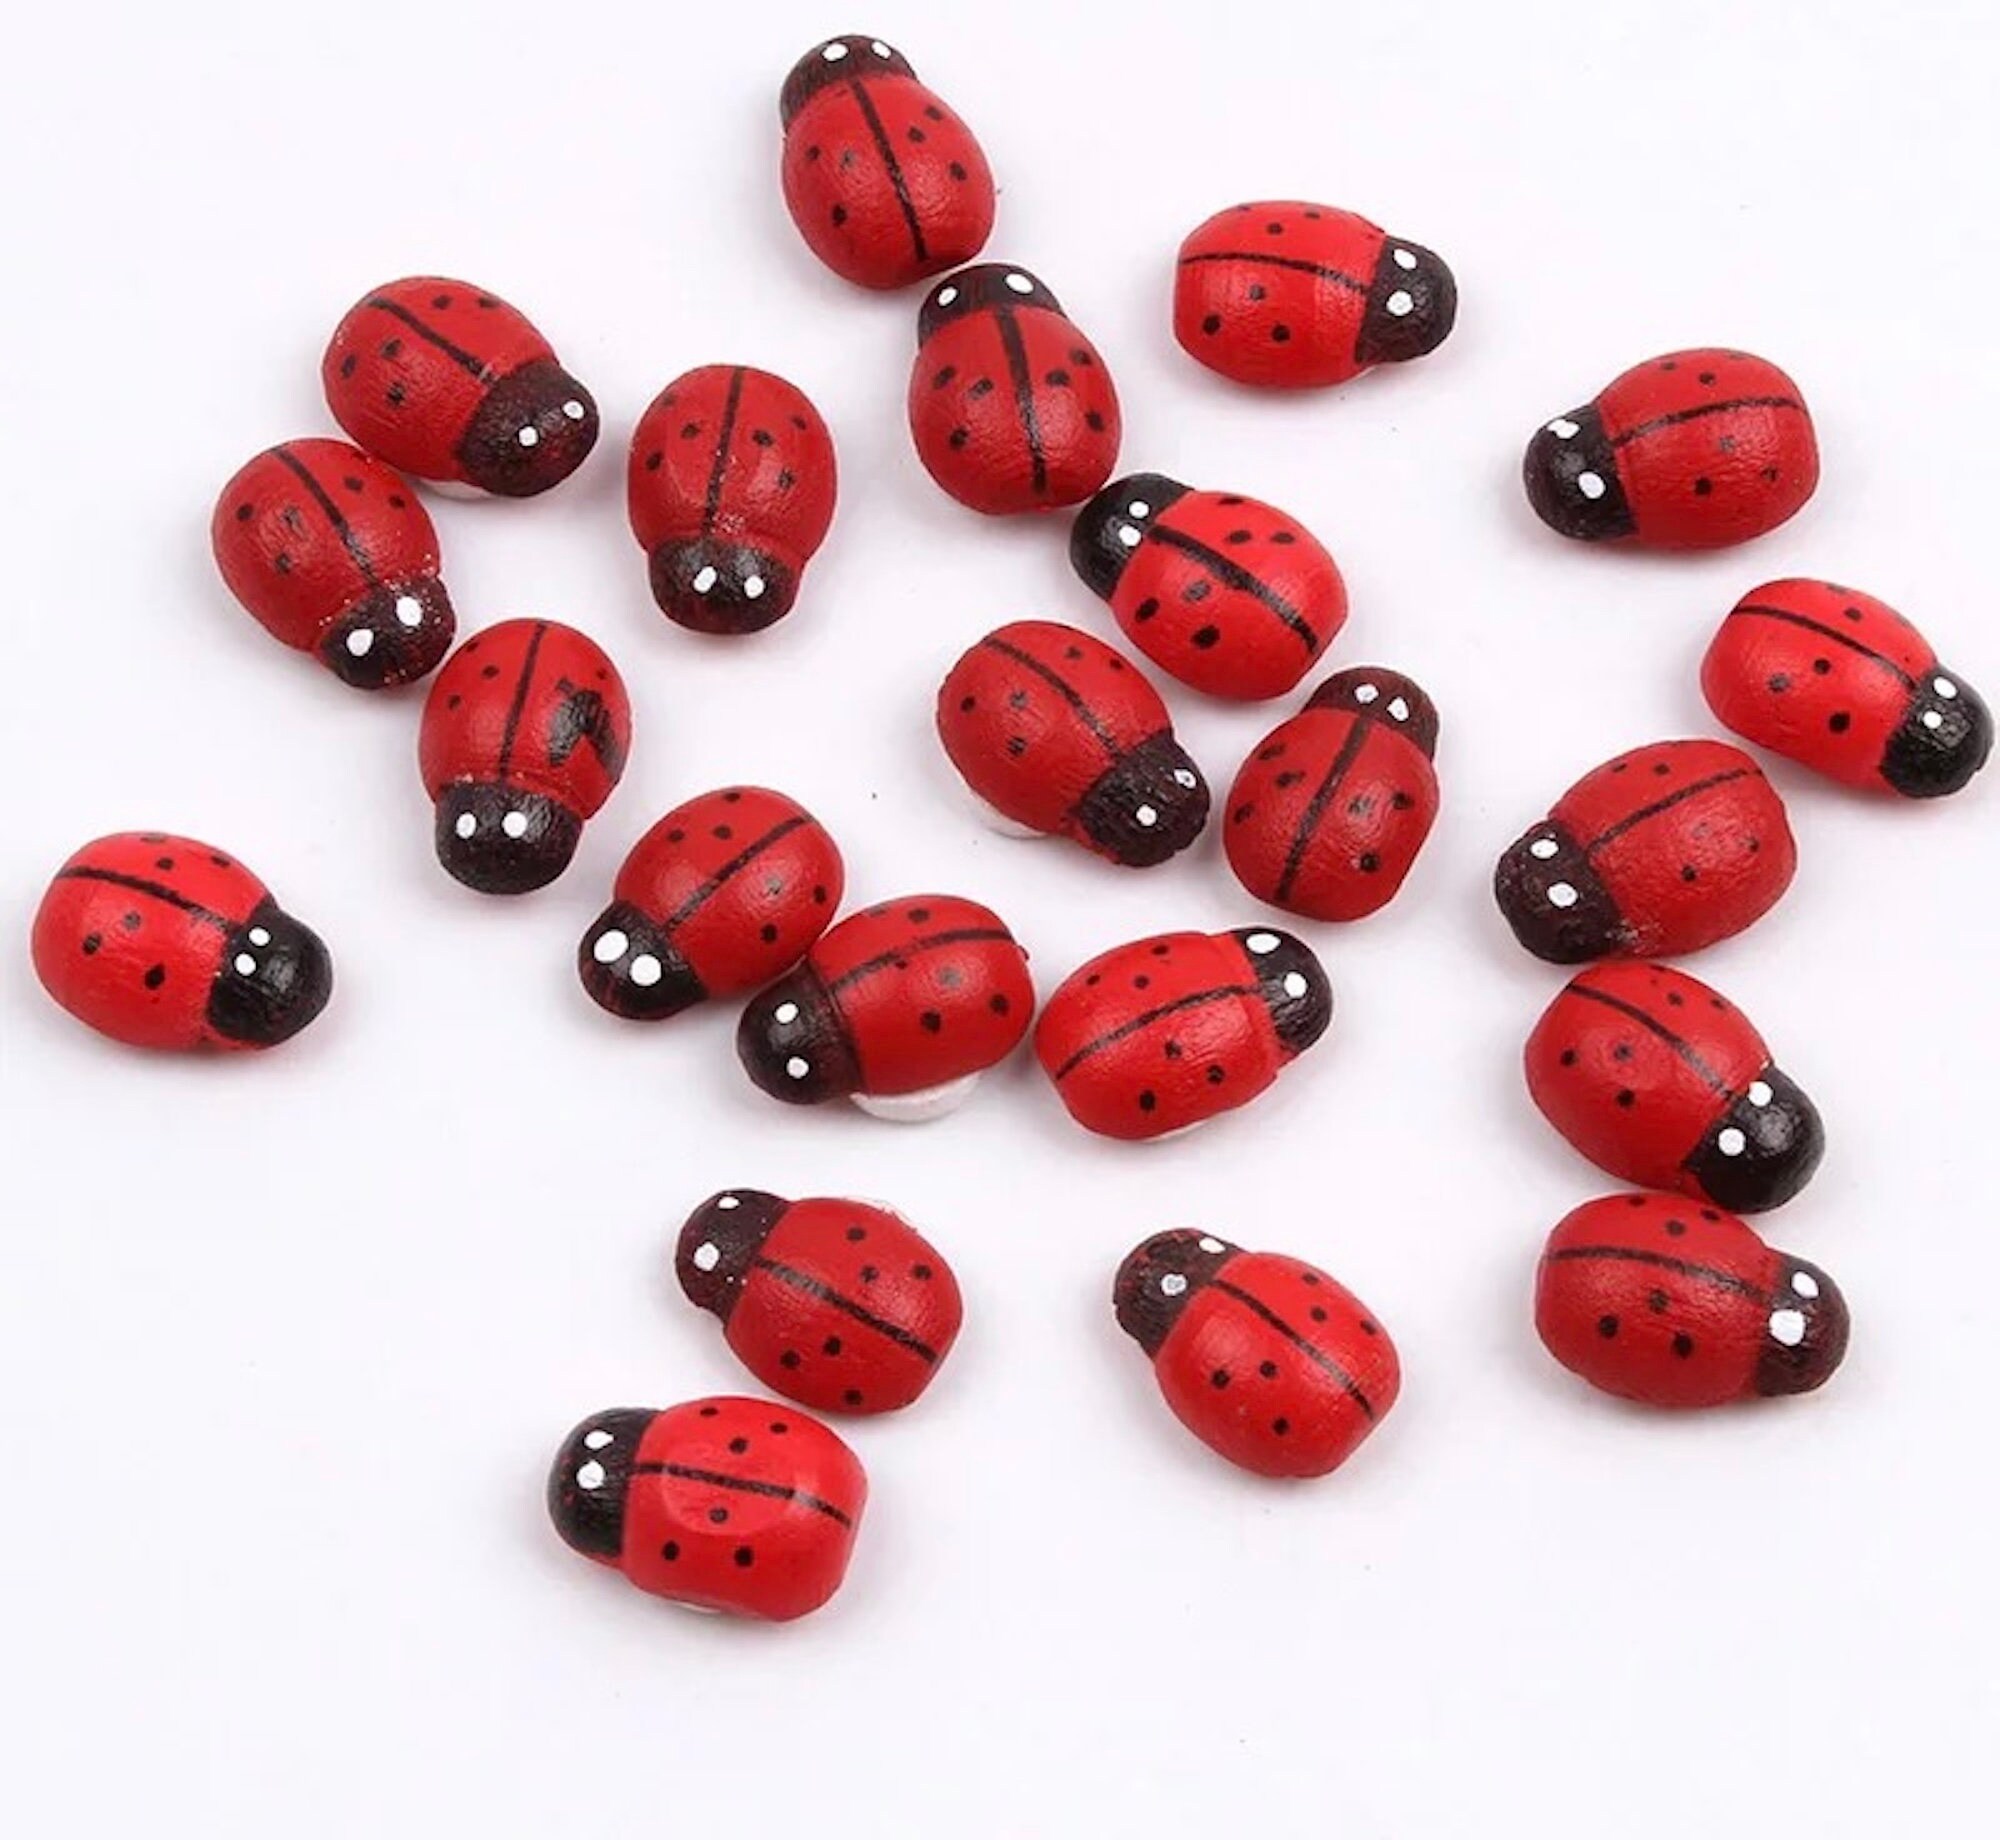 ZOEON 100Pcs Wooden Ladybird and 100Pcs Wooden Bee Sticker Home Decor Adhesive Back DIY Craft 